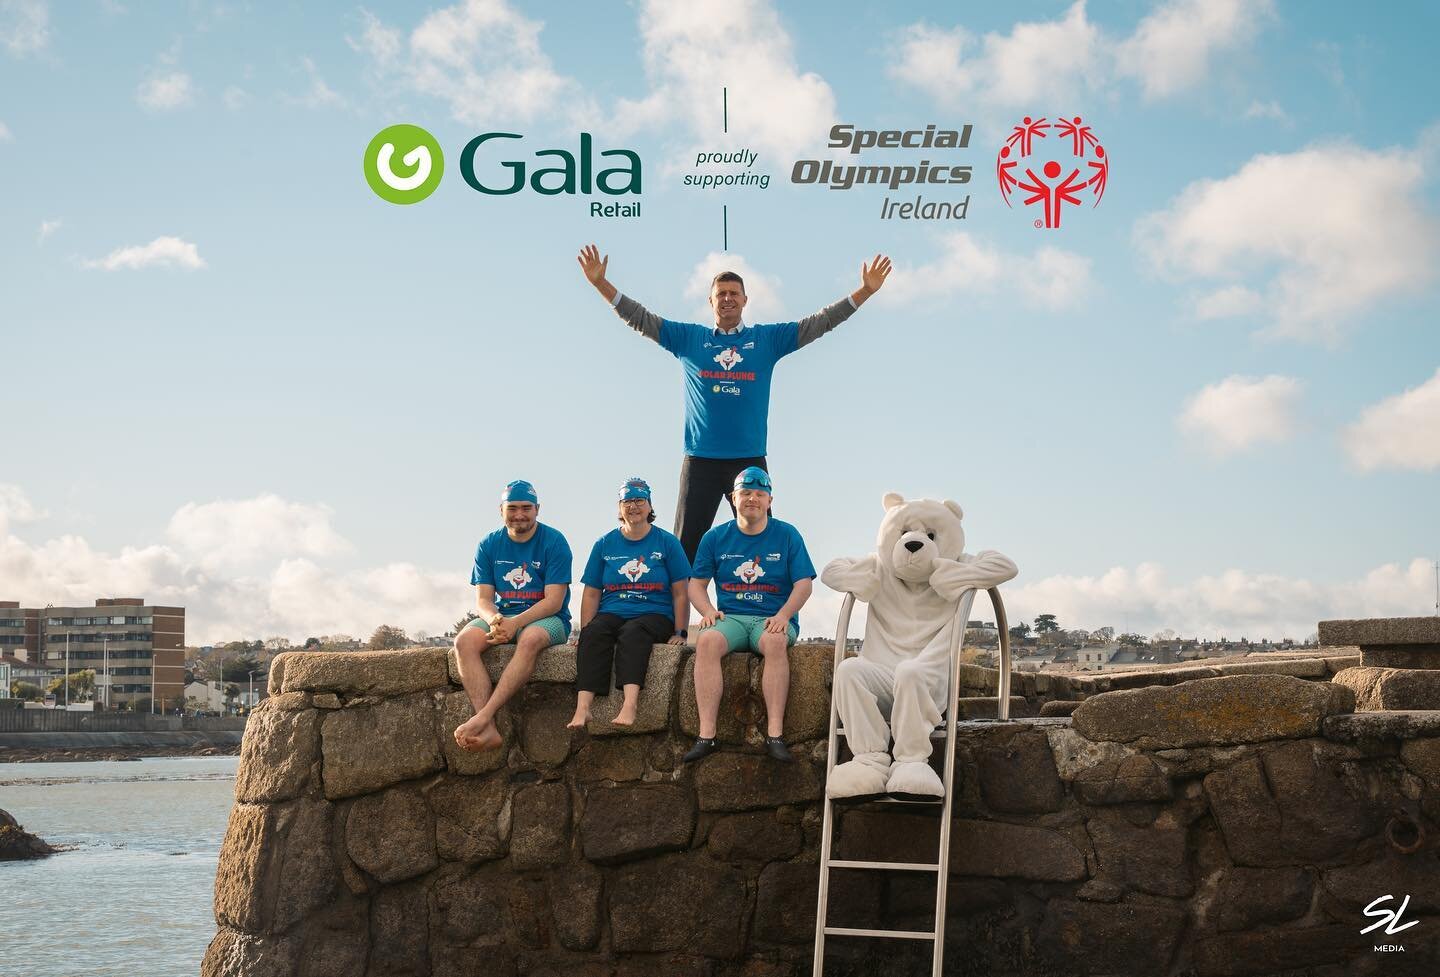 It was great to get the chance to work with former Republic of Ireland International Niall Quinn, on the launch of the Polar Plunge campaign. 

@specialolympicsireland Polar Plunge, is supported by @gala_retail and will raise funds to support Special